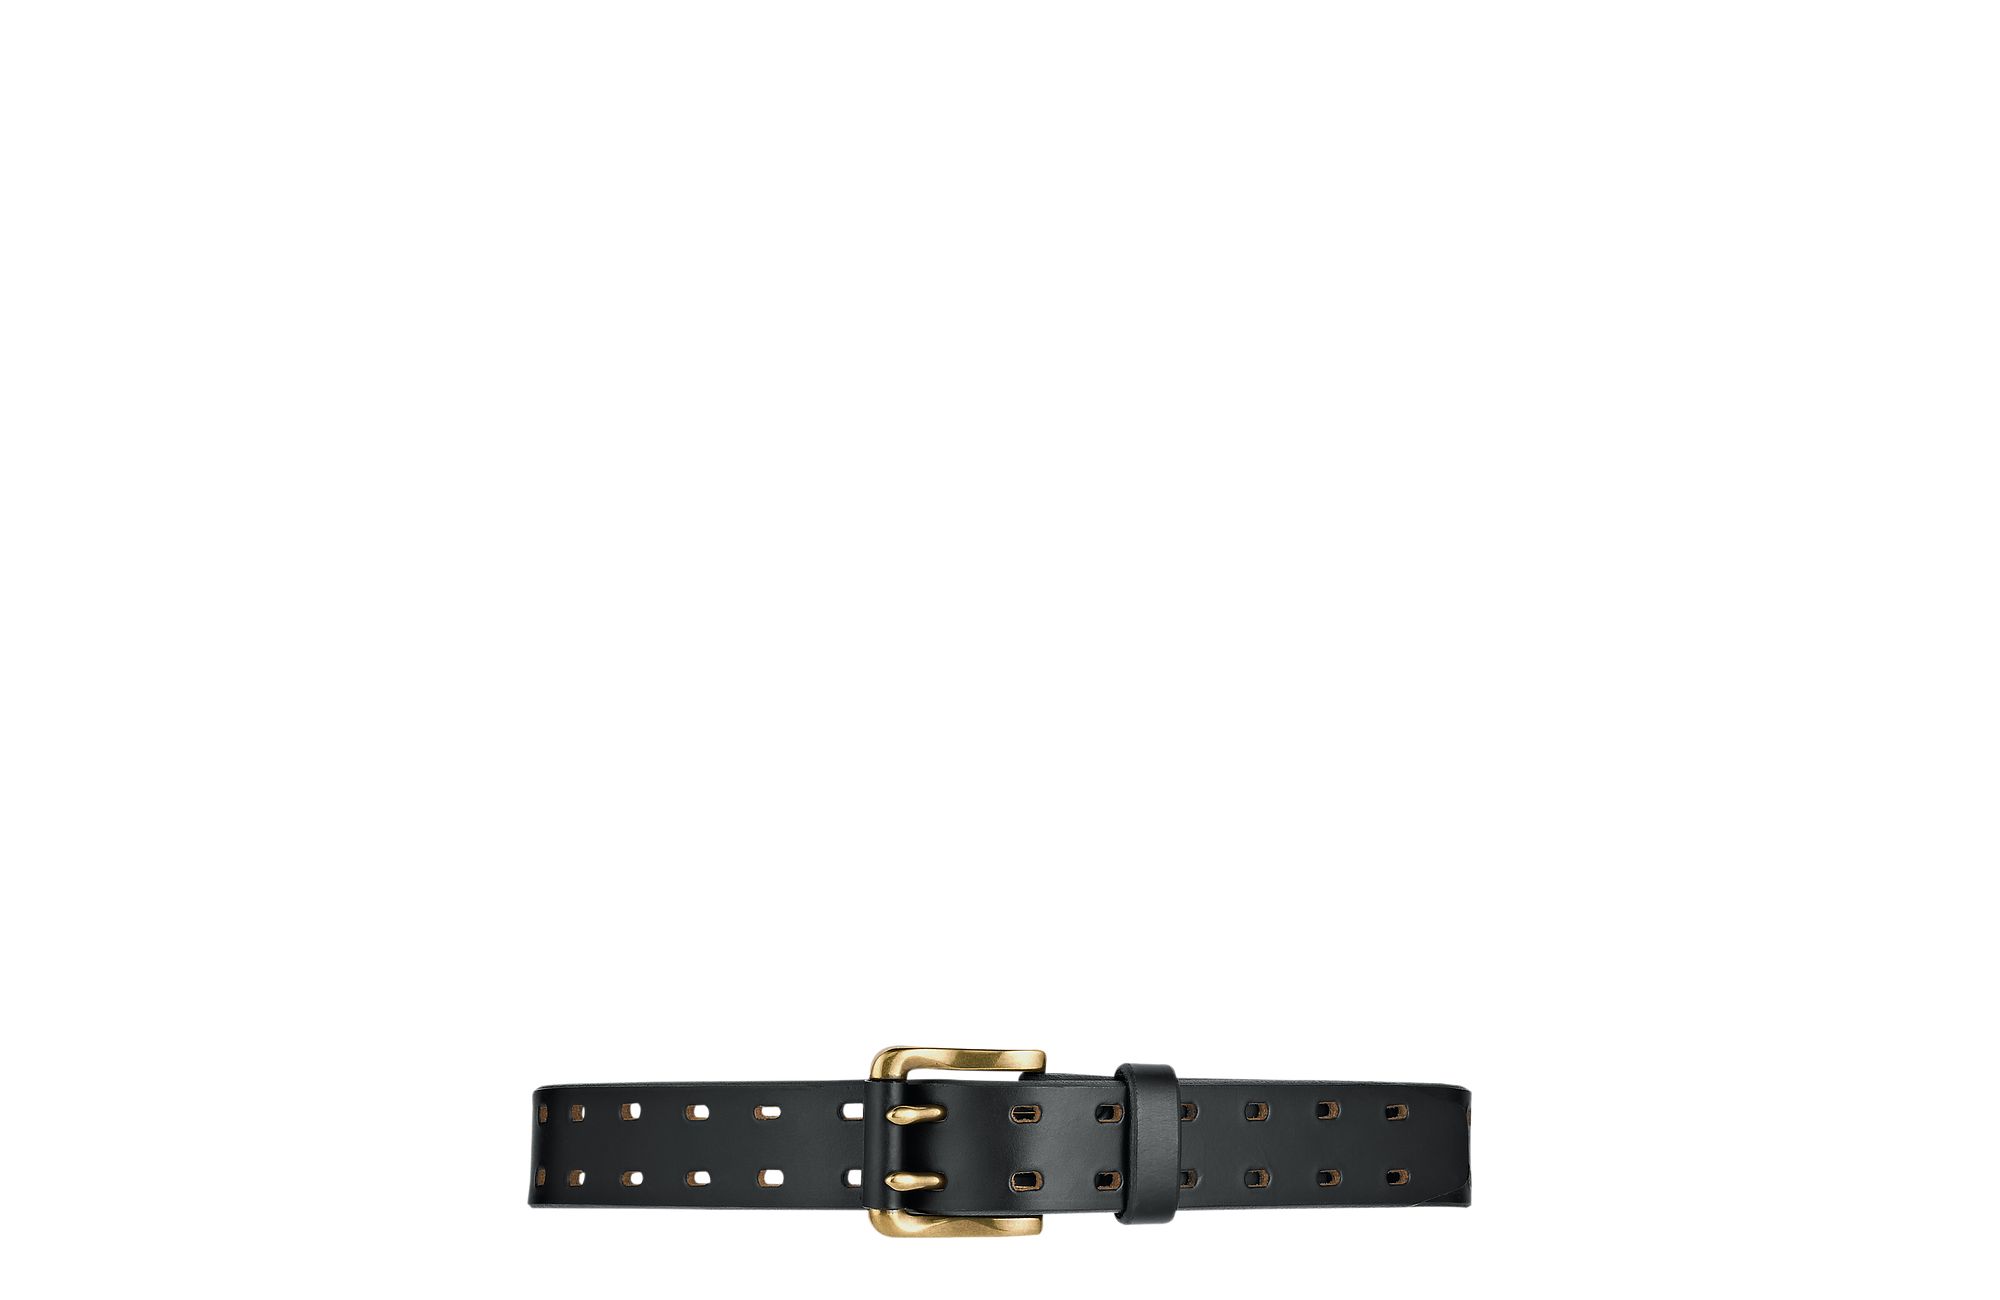 Leather belt with double prong buckle, red